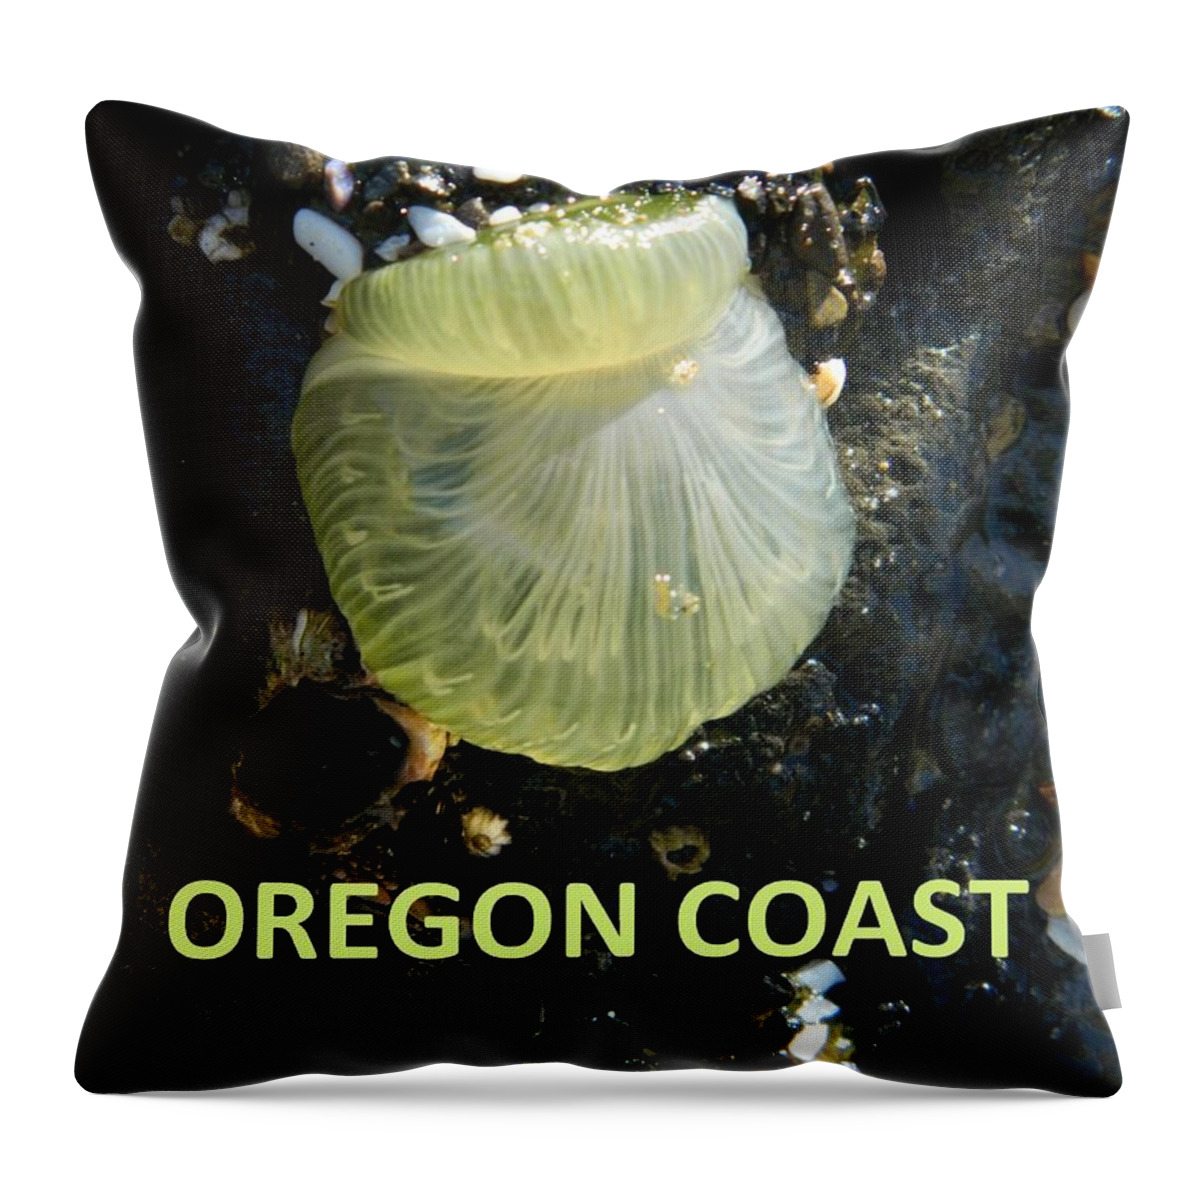 Oregon Throw Pillow featuring the photograph Oregon Coast Sea Anemone by Gallery Of Hope 